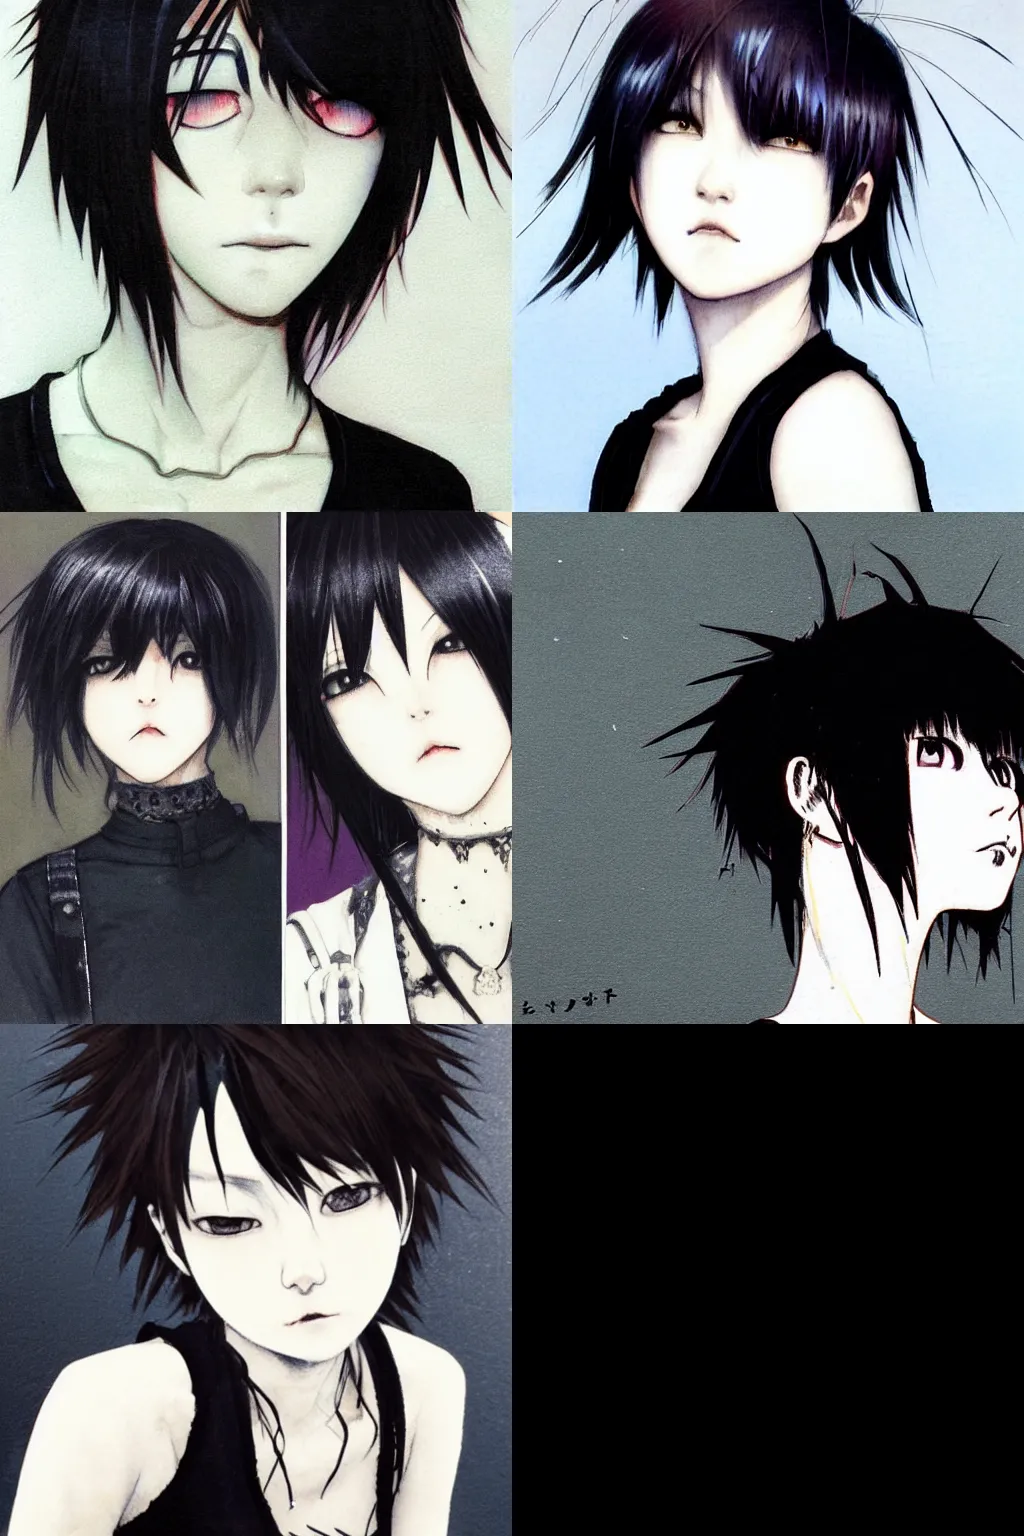 Prompt: an emo portrait by yoshitaka amano. her hair is dark brown and cut into a short, messy pixie cut. she has a slightly rounded face, with a pointed chin, large entirely - black eyes, and a small nose. she is wearing a black tank top, a black leather jacket, a black knee - length skirt, and a black choker..